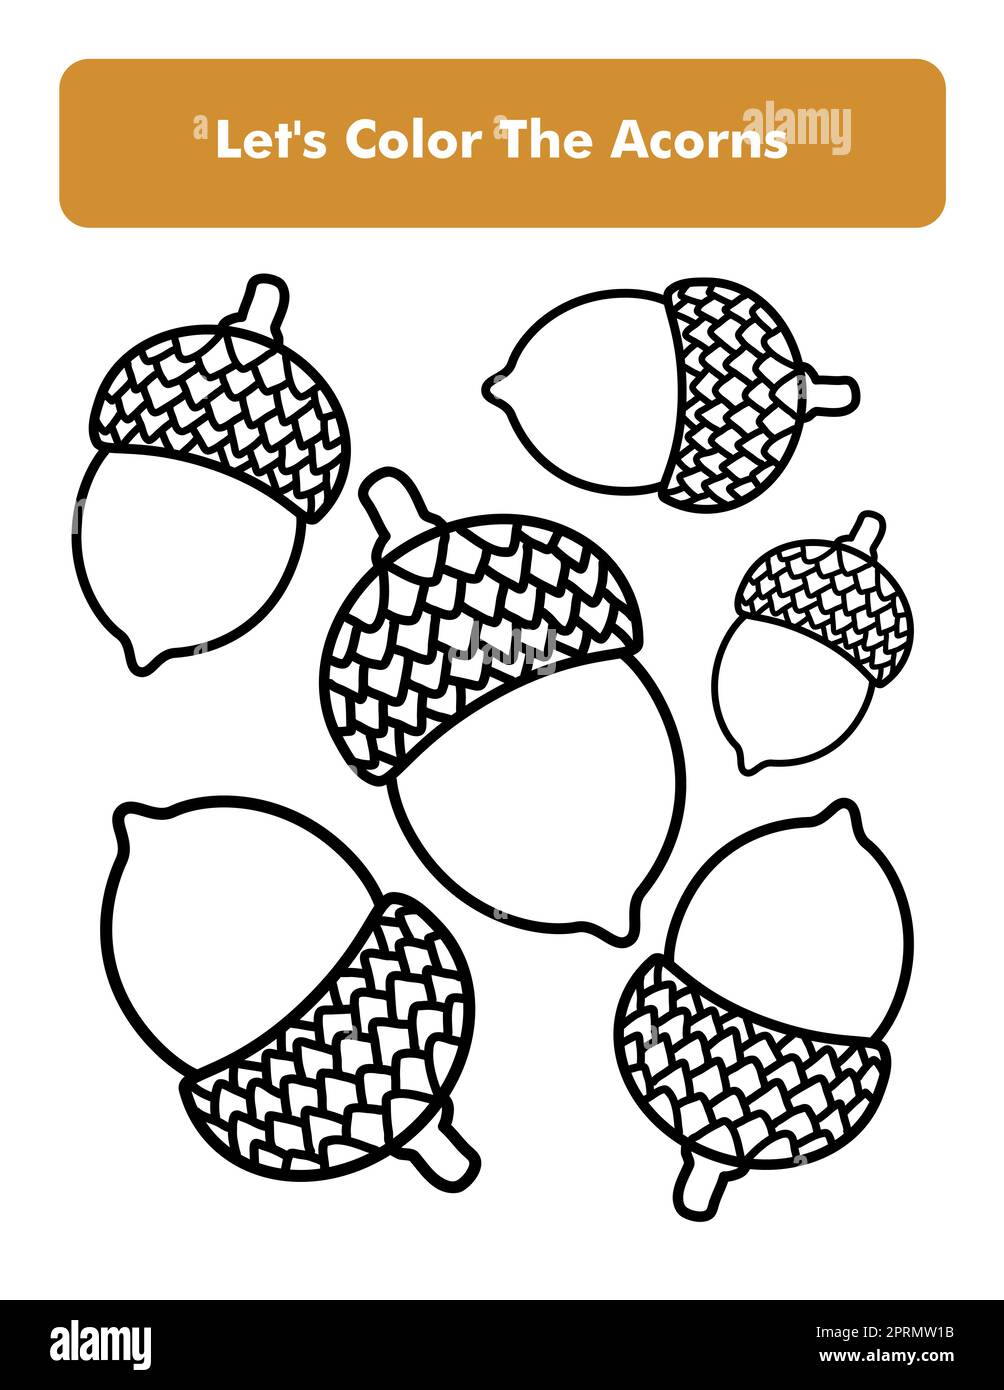 Acorns Coloring Book Page In Letter Page Size. Children Coloring Worksheet.  Premium Vector Element Stock Photo - Alamy